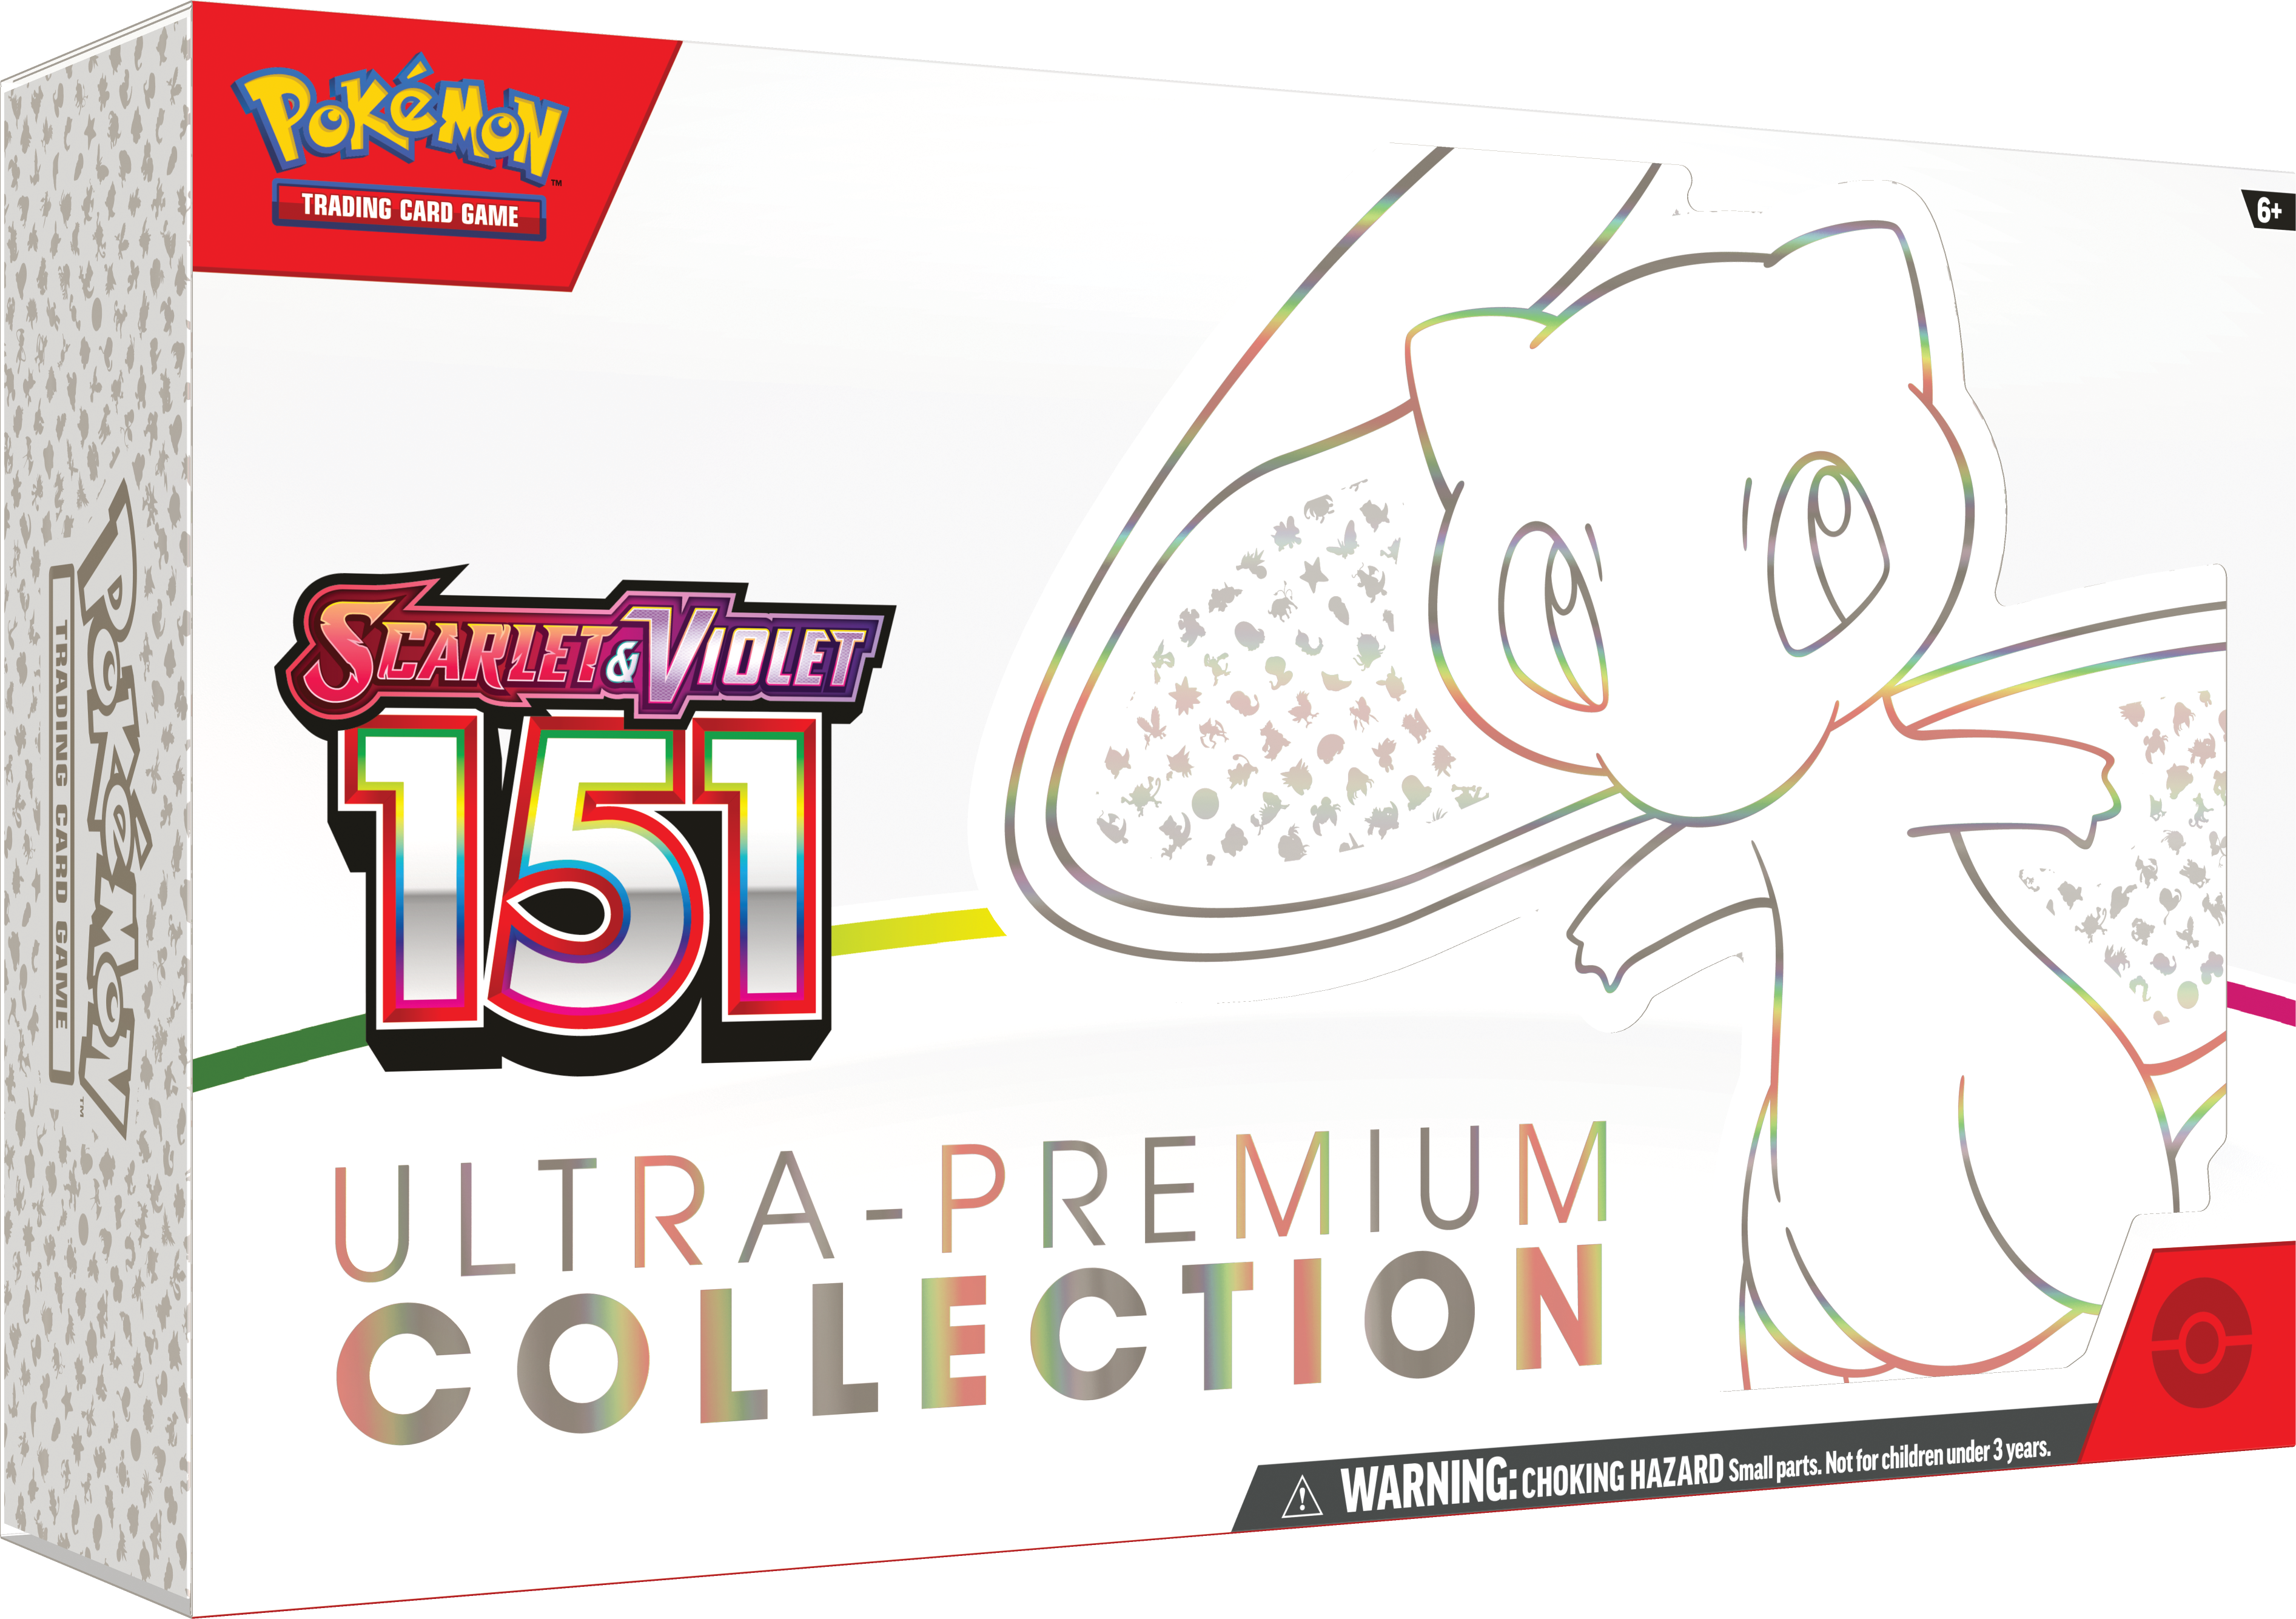 Pokémon 151 sees United States release this September